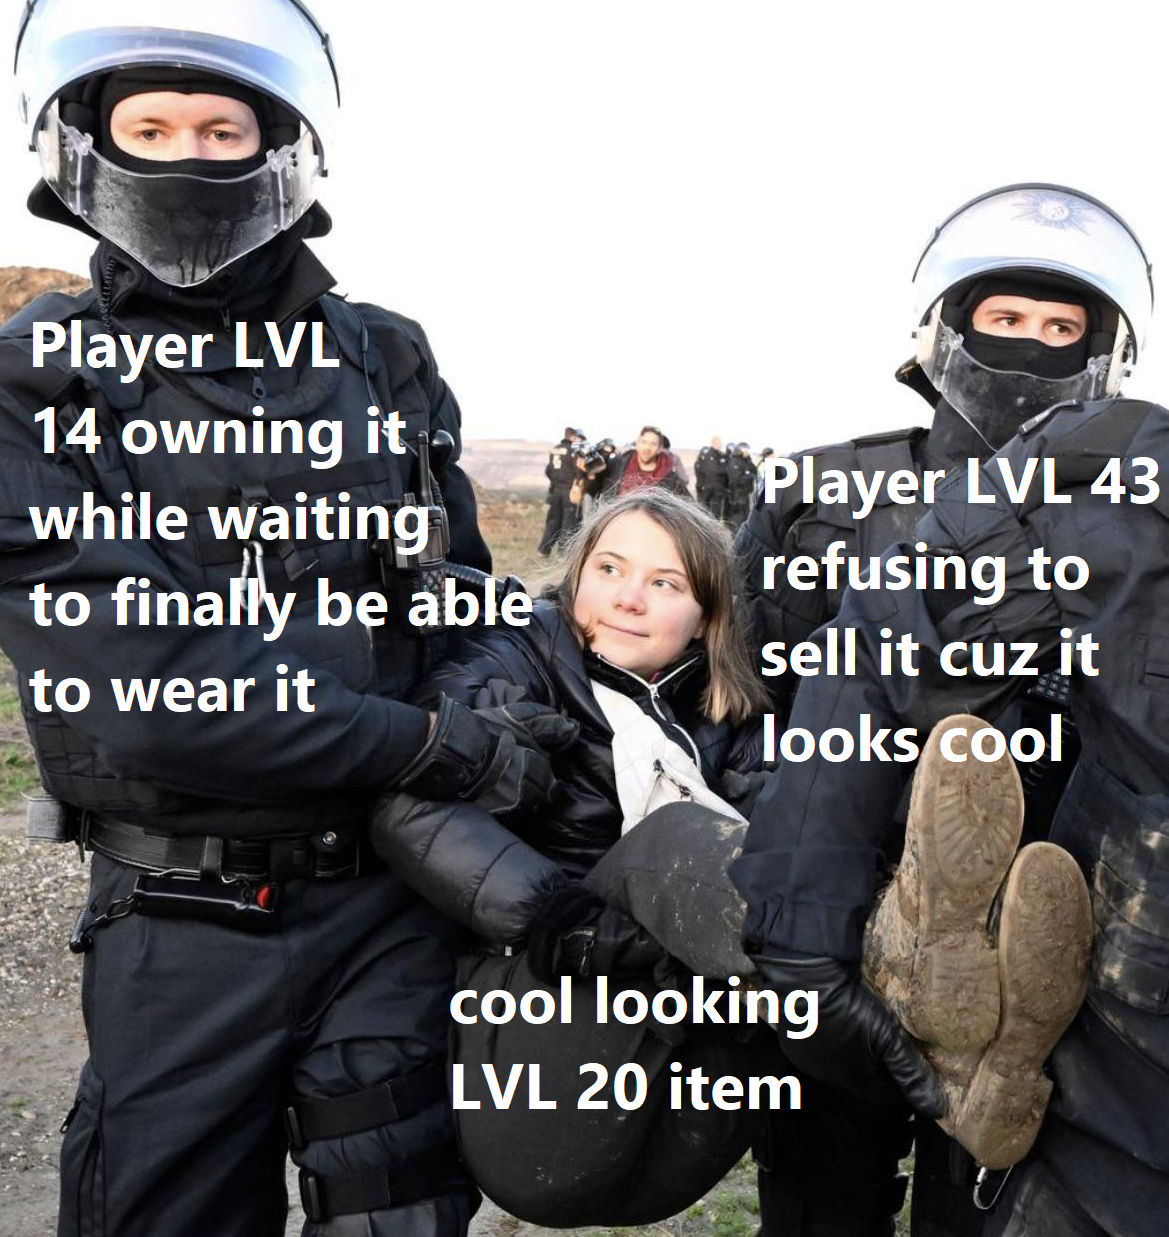 dank memes - greta thunberg arrested - Player Lvl 14 owning it while waiting to finally be able to wear it 8 Player Lvl 43 refusing to sell it cuz it looks cool cool looking Lvl 20 item